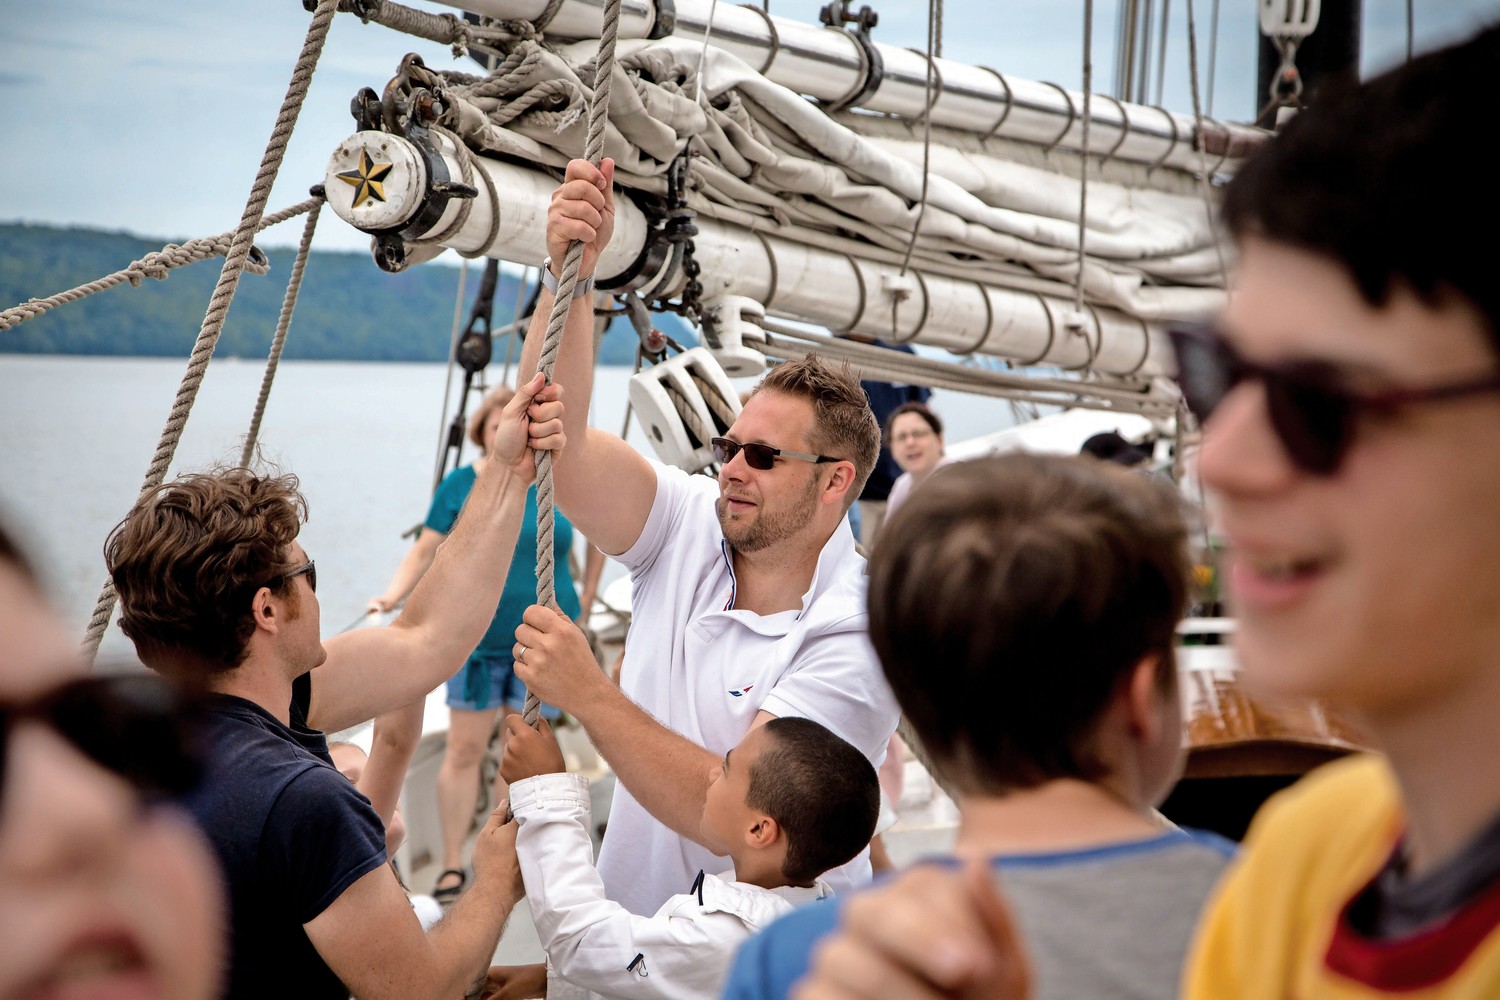 Crew members on the Pioneer schooner show would-be sailors how to raise the sails during RiverFestBX.